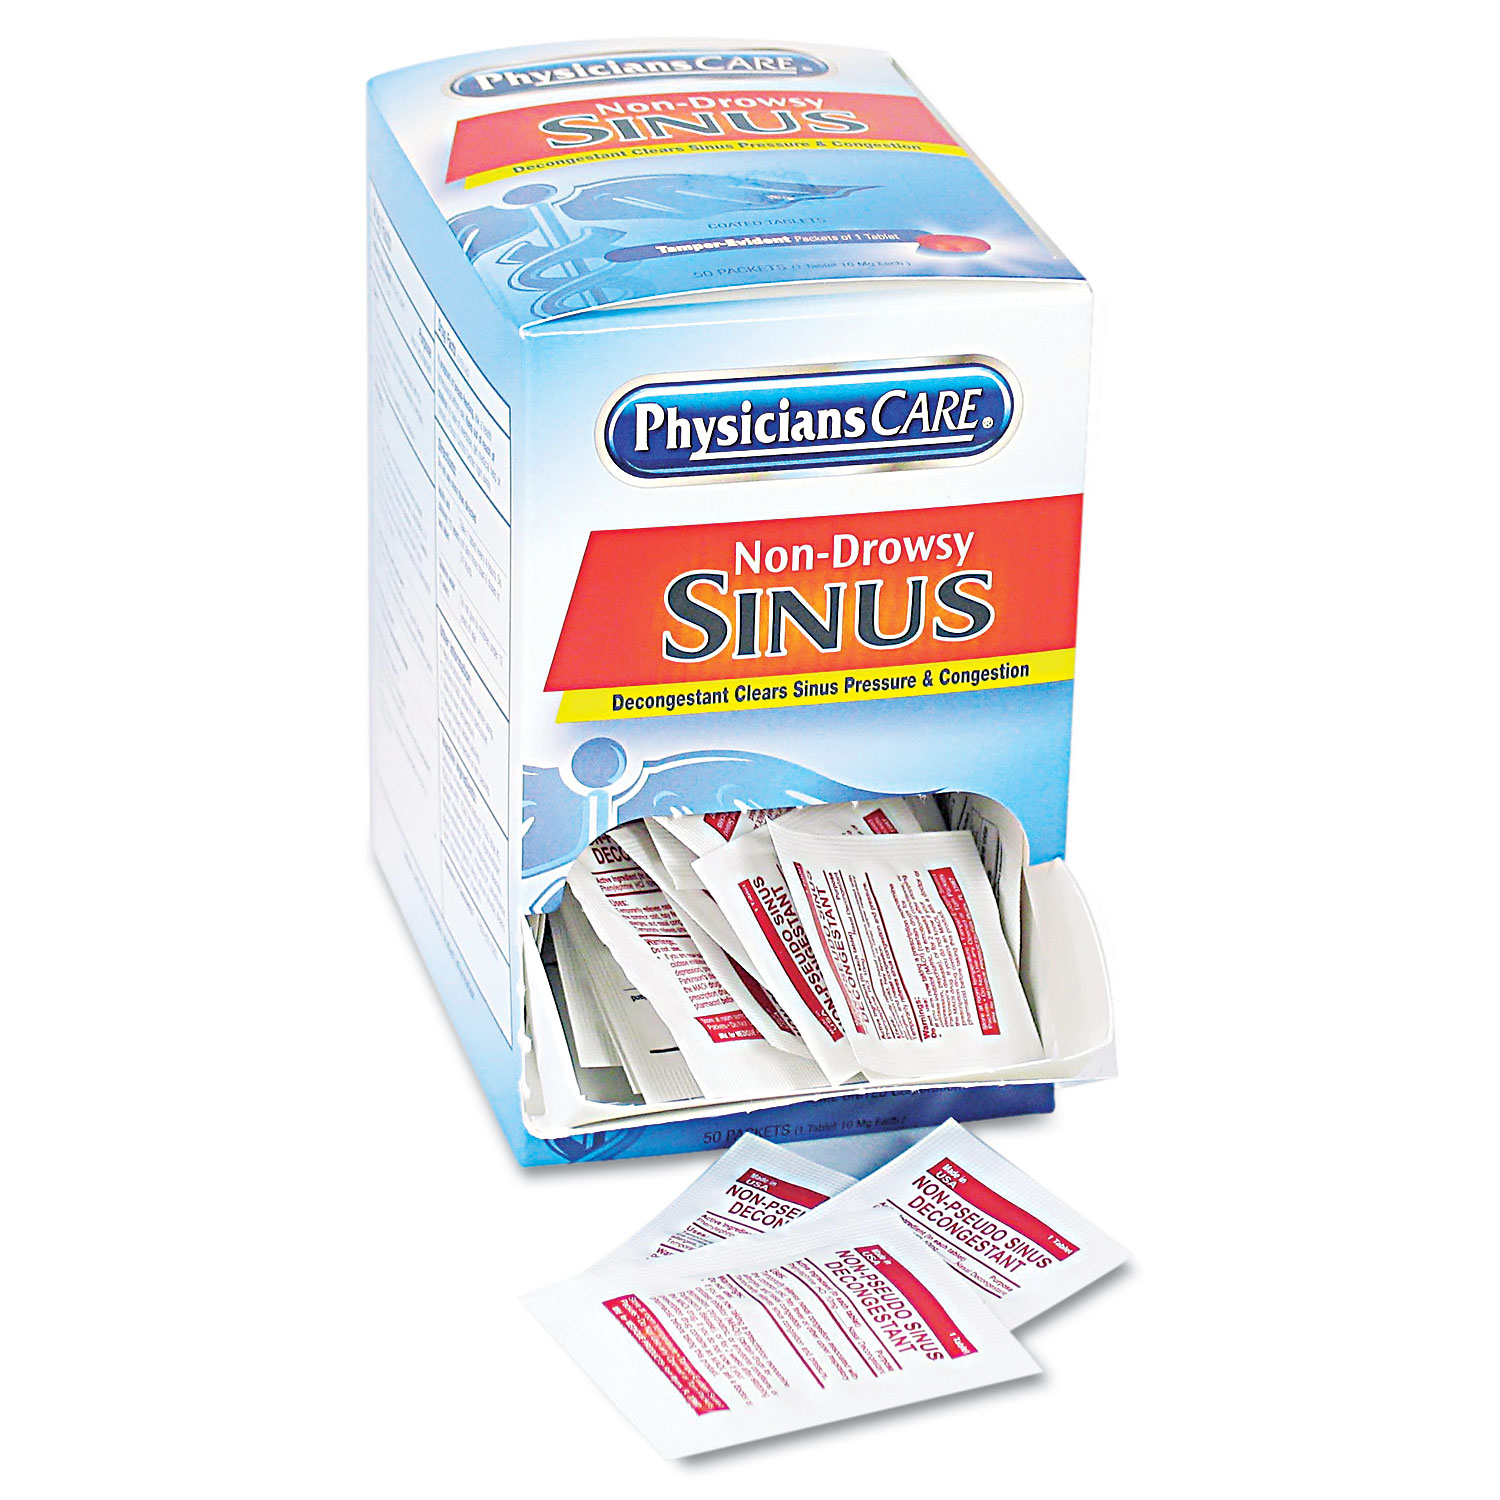  PhysiciansCare 90087-004 Sinus Decongestant Congestion Medication, 10mg, One Tablet/Pack, 50 Packs/Box (ACM90087) 